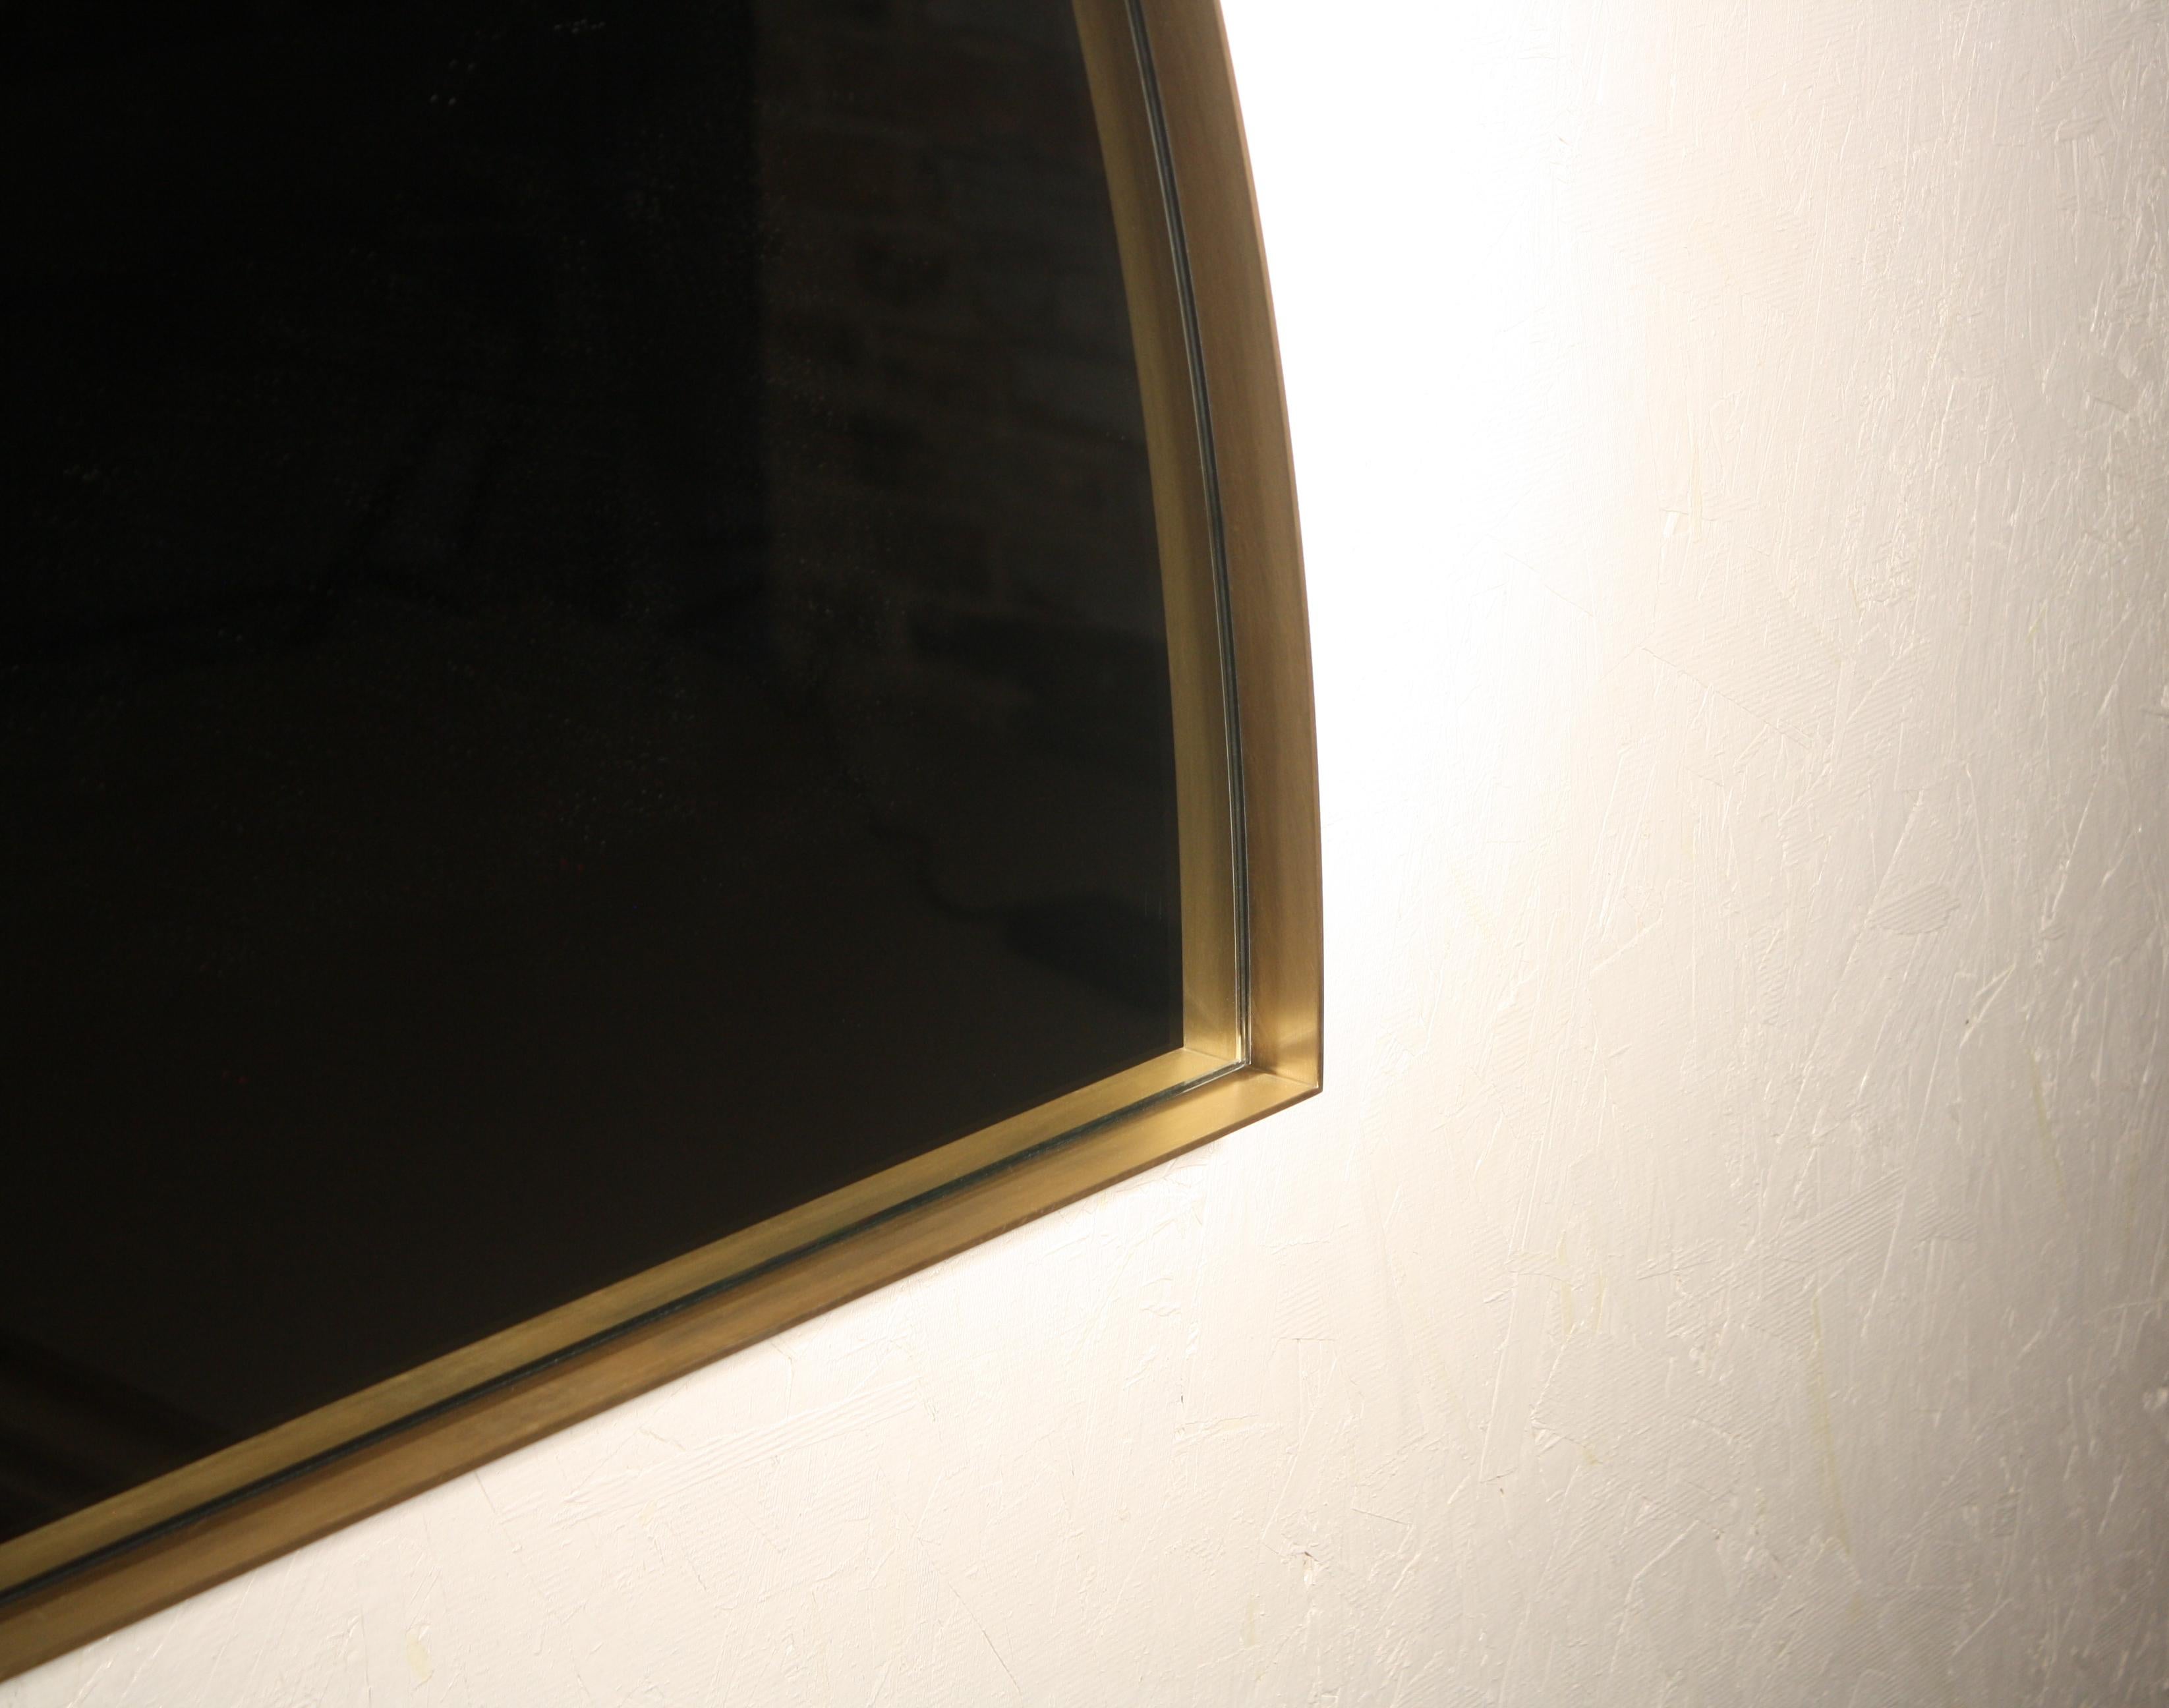 Quarter Handmade Satin Brass and Glass Mirror by Laylo Studio In New Condition For Sale In Chicago, IL